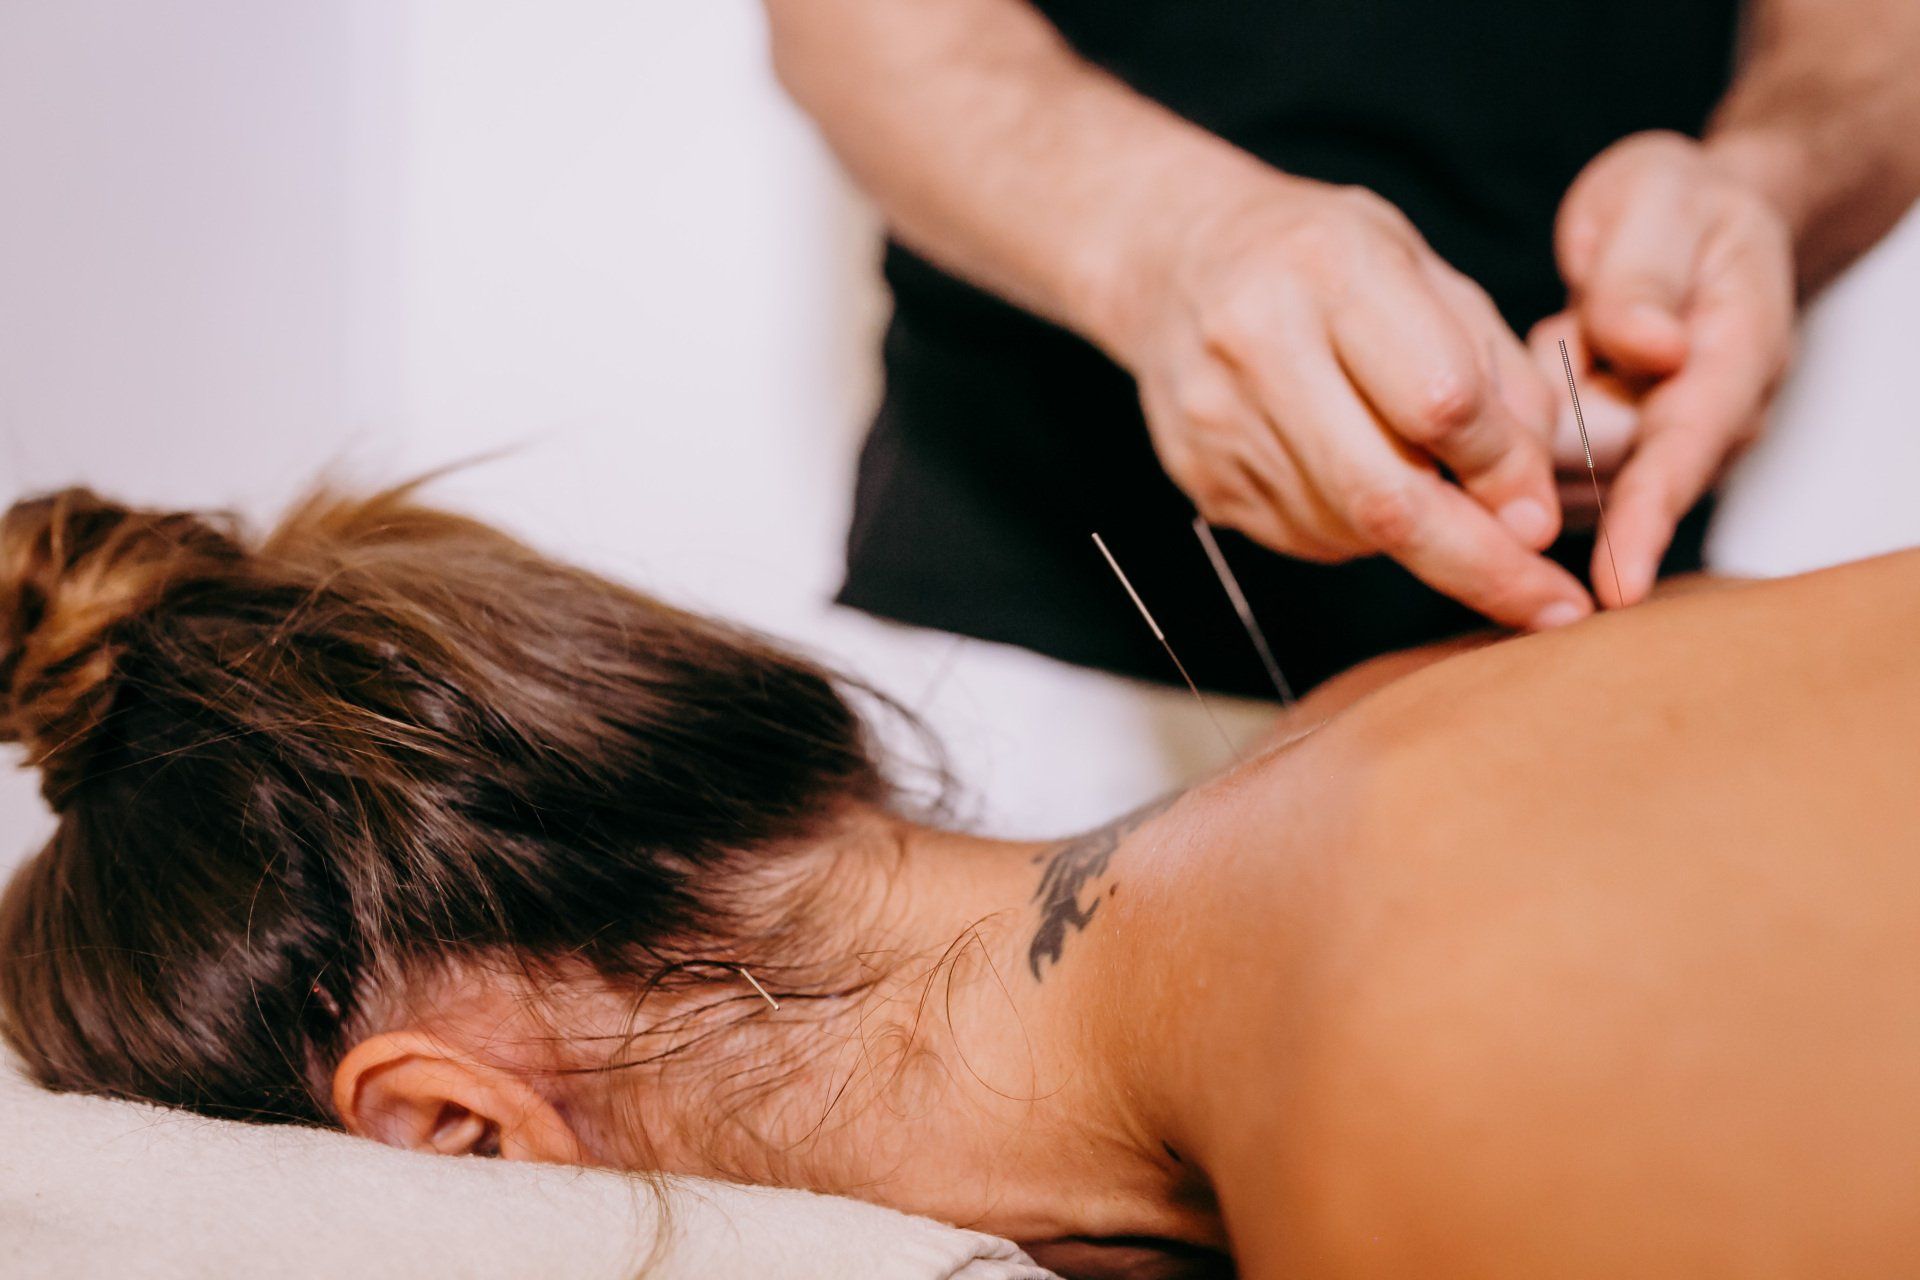 Acupuncture for Pain Management in West Palm Beach, FL